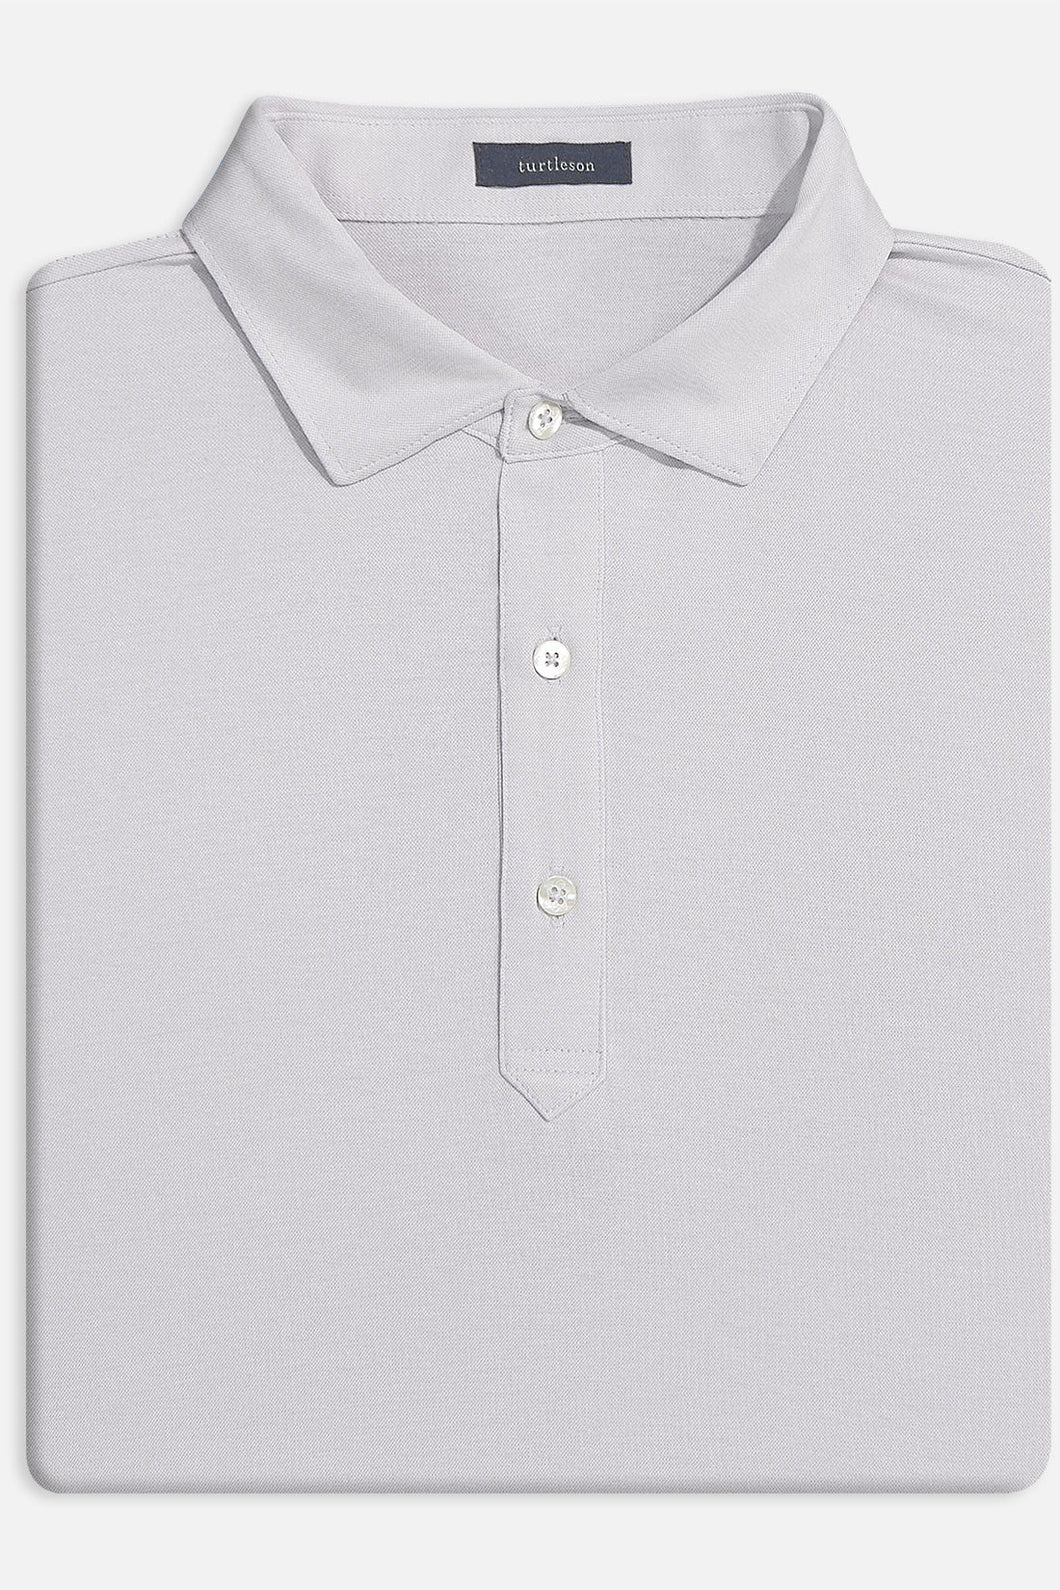 Turtleson Lester Oxford Performance Polo in White